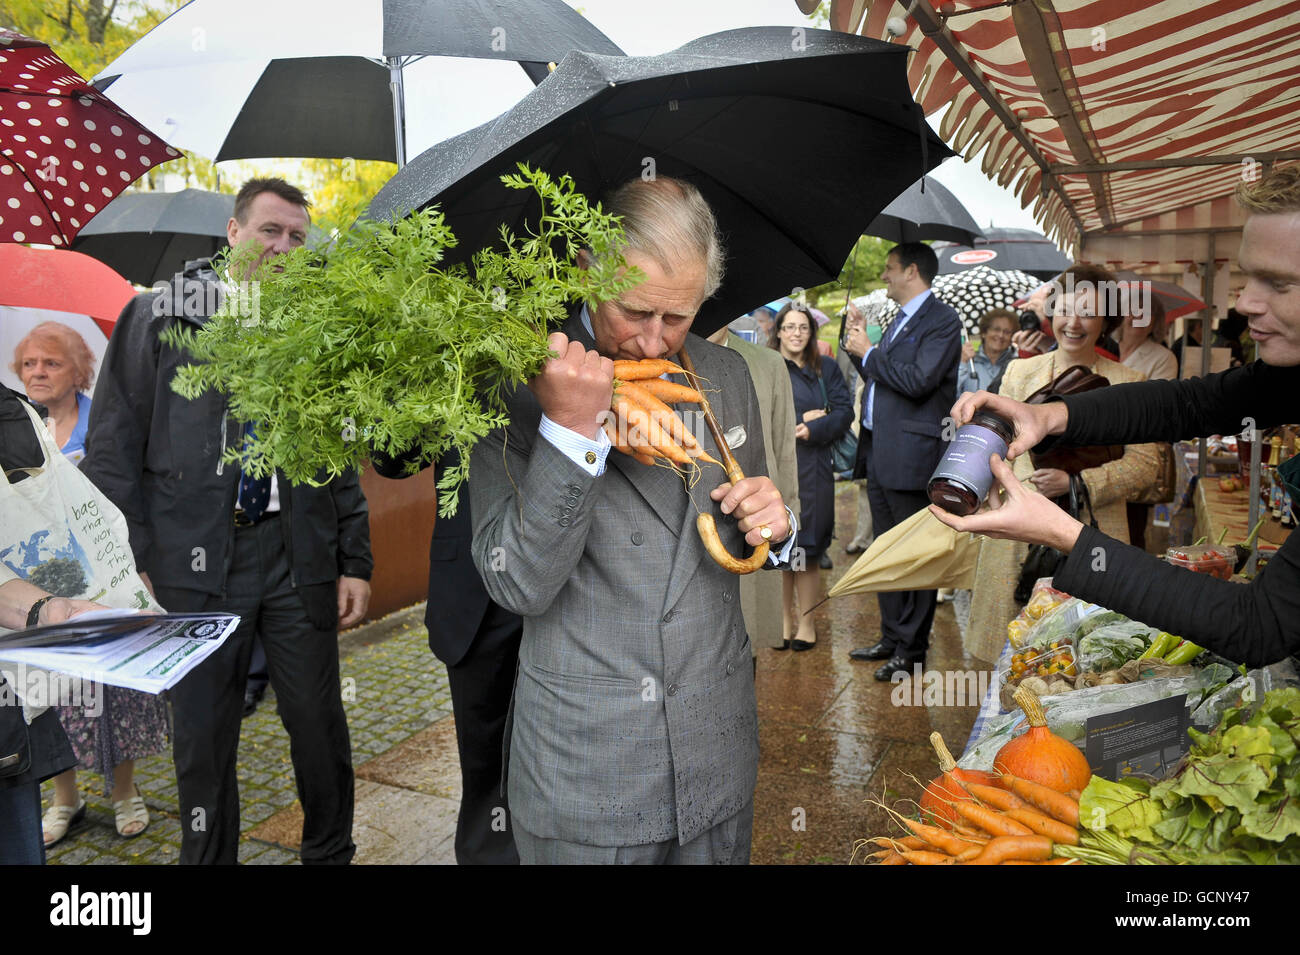 The Prince of Wales receives and sniffs a bunch of carrots from a stall holder at the National Botanic Gardens of Wales in Carmarthen as he continues his tour of Britain to promote his sustainable living initiative START. Stock Photo